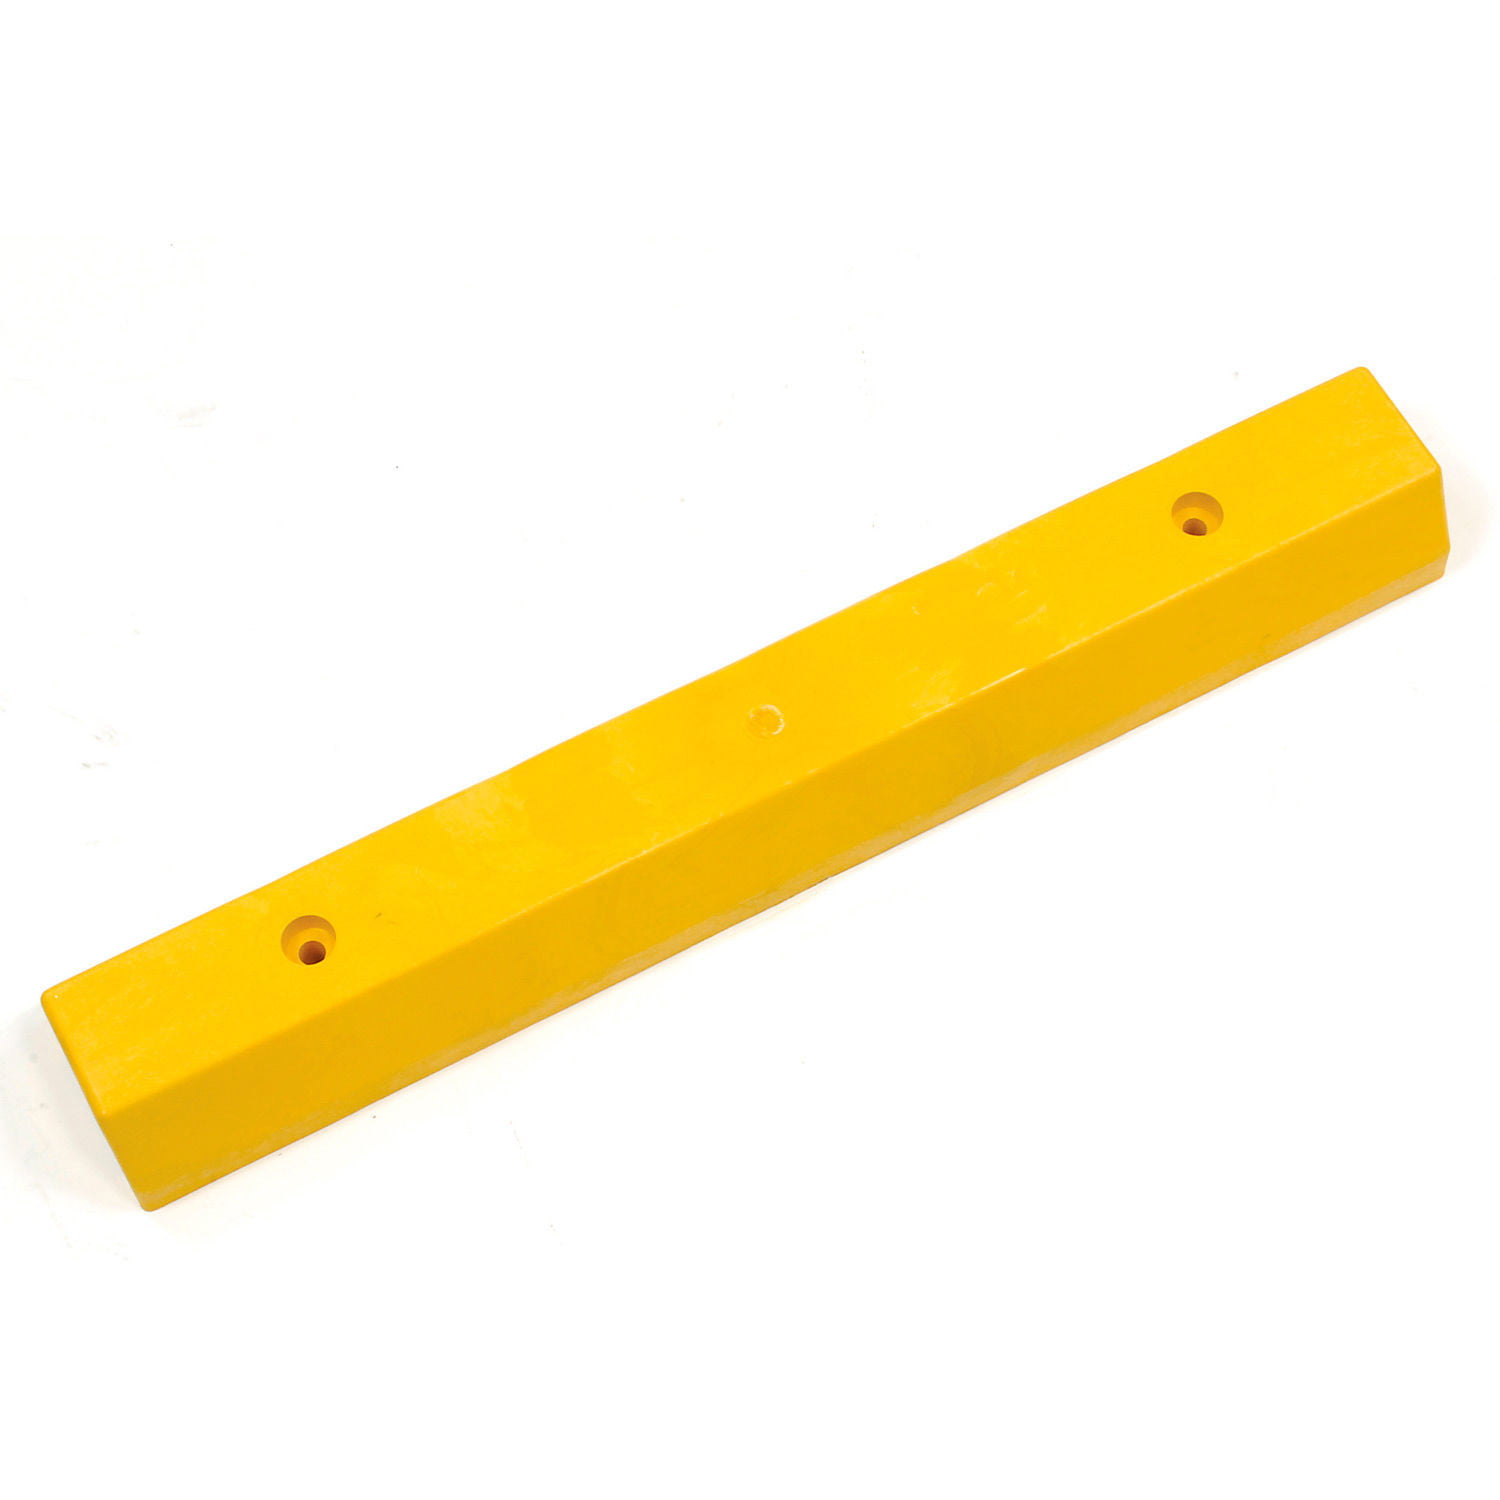 IronGuard 268782YLA Parking Curb Recycled Plastic Yellow Asphalt Installation 36 Lx5-3/4 Wx3-1/2 H 